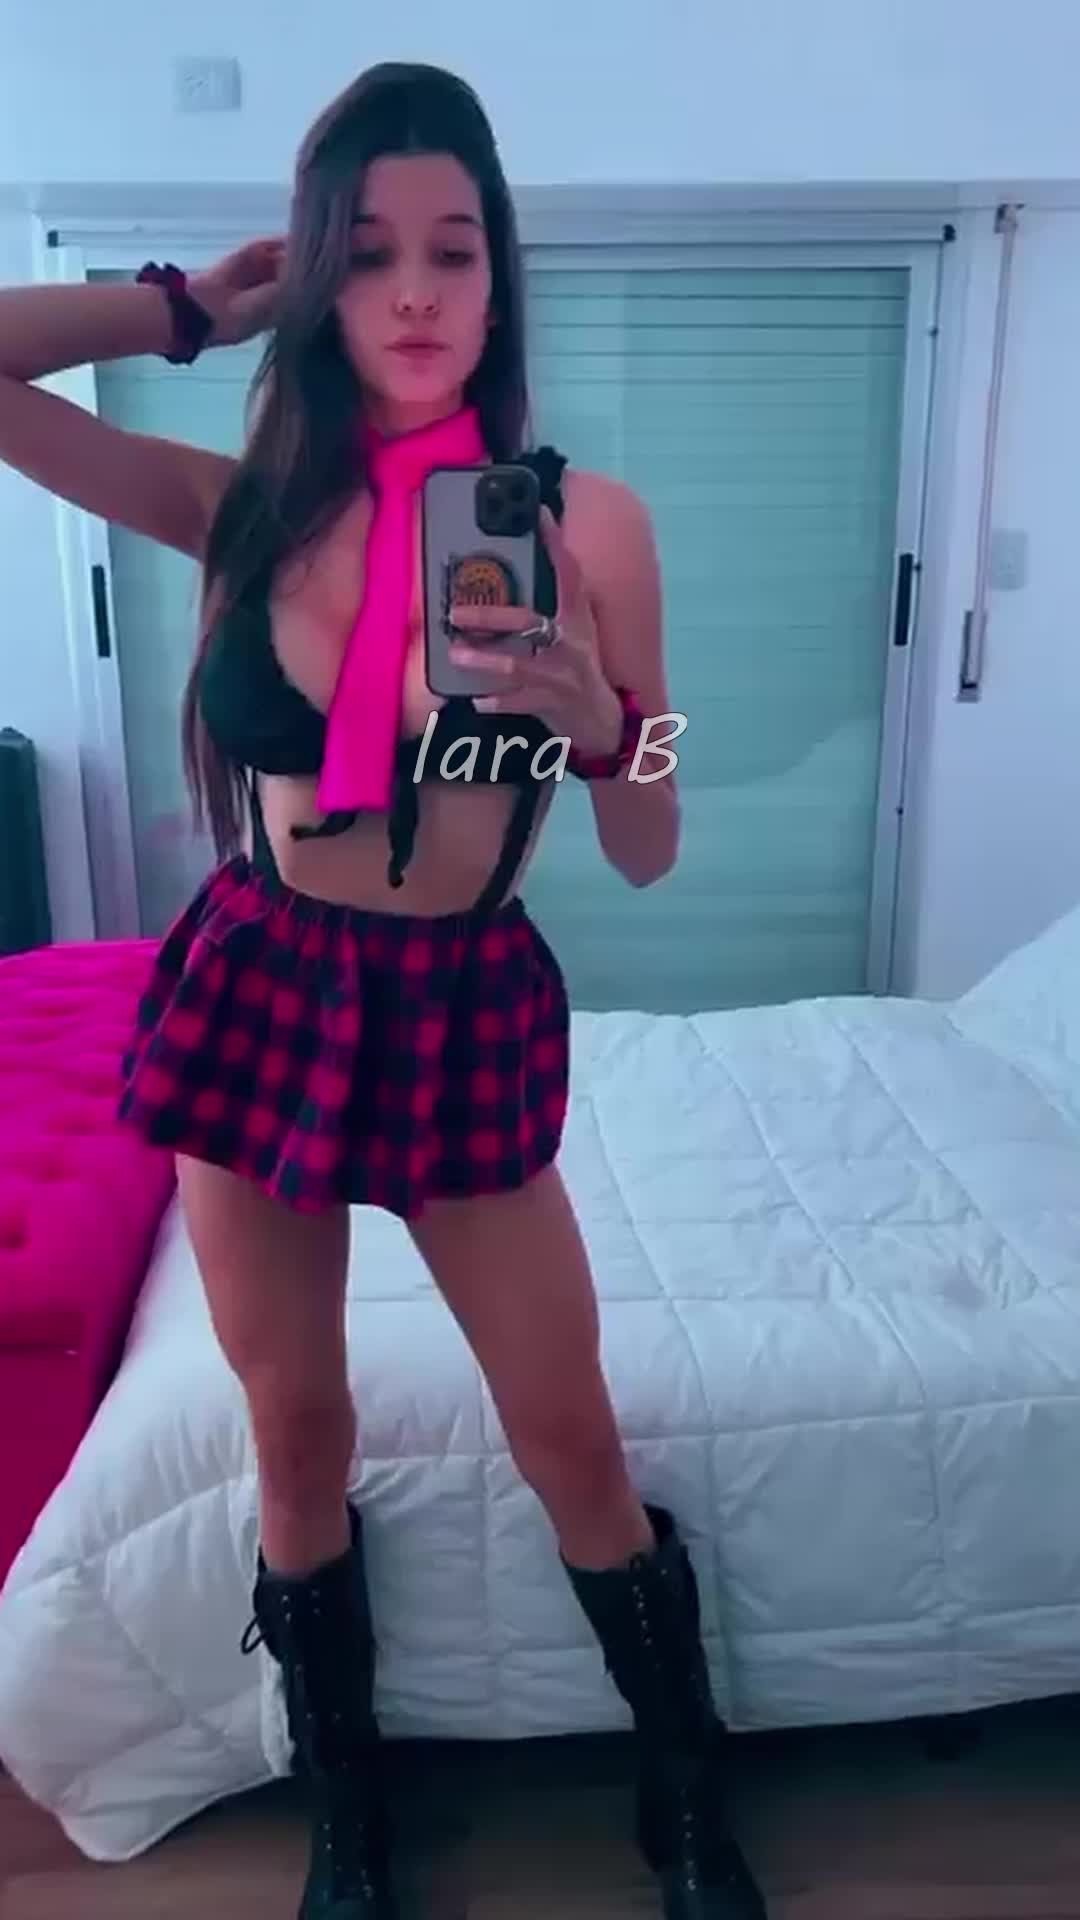 Video by Iara B star with the username @iarabstar, who is a star user,  October 8, 2022 at 5:00 AM. The post is about the topic Teen and the text says 'All this is for you

💋 http://loverfans.com/IaraB_star
💋 http://fancentro.com/iarabstar
💋 http://ismygirl.com/IaraB_star

#chick #pussy #asshole #butt #booty #nude #pussyshow #teen #teens #schoolgirl #slut #porn #iaraB'